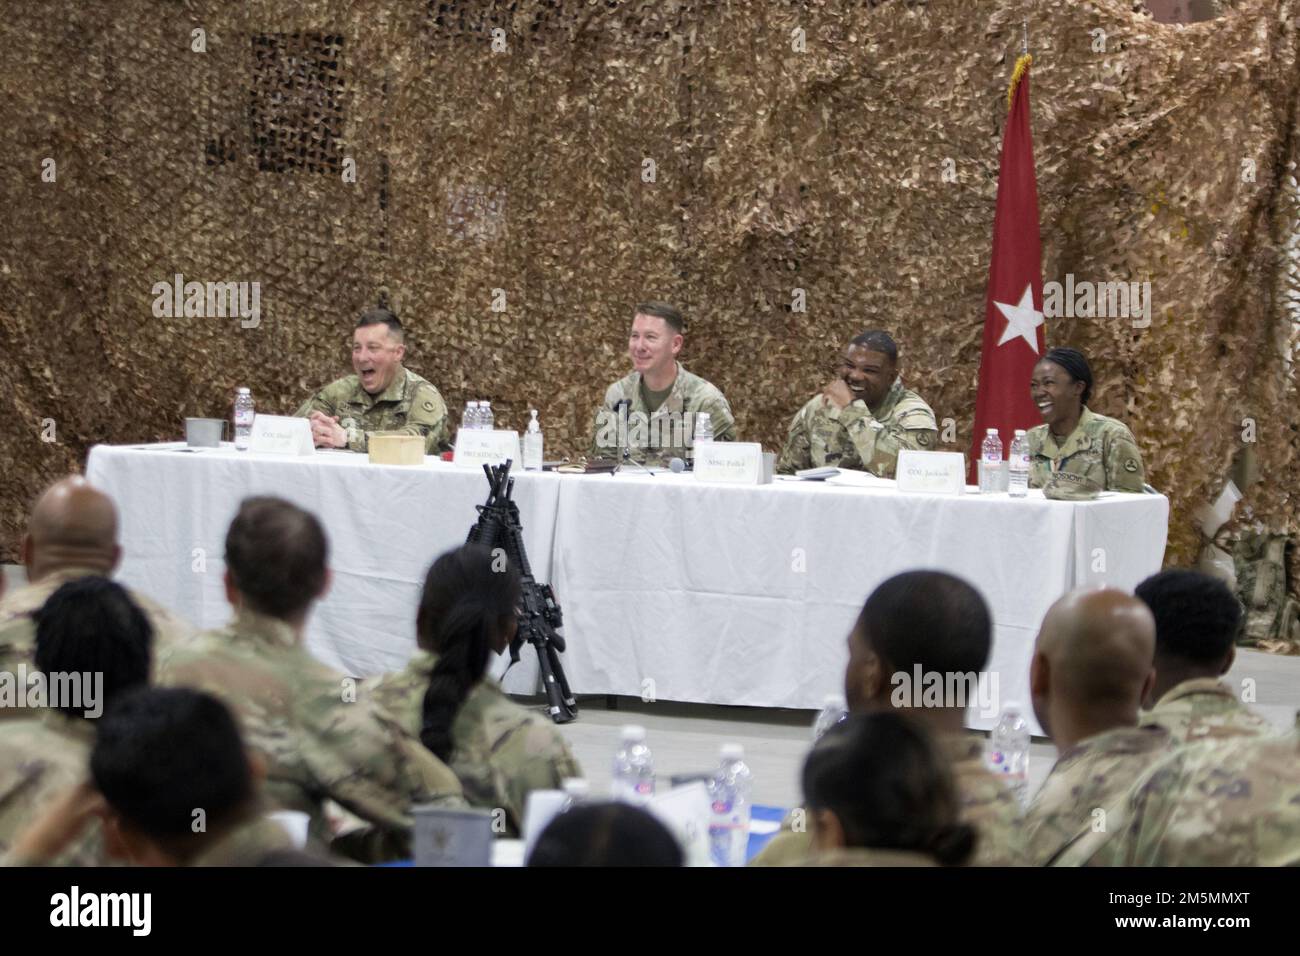 (From left to right) Col. Sean P. Davis, deputy commanding officer, 1st Theater Sustainment Command, Brig. Gen. Lance G. Curtis, commanding general, 3rd Expeditionary Sustainment Command, Master Sgt. Jamel C. Fulks, senior enlisted advisor, 3rd ESC, and Col. Fenicia L. Jackson, chief of staff, 3rd ESC, laugh during a tactical dining-in at Camp Arifjan, Kuwait, Mar. 26, 2022. Curtis hosted the event to uphold U.S. military customs and traditions, foster camaraderie and esprit de corps, and acknowledge the unit’s accomplishments during its deployment in support of 1st TSC. Stock Photo